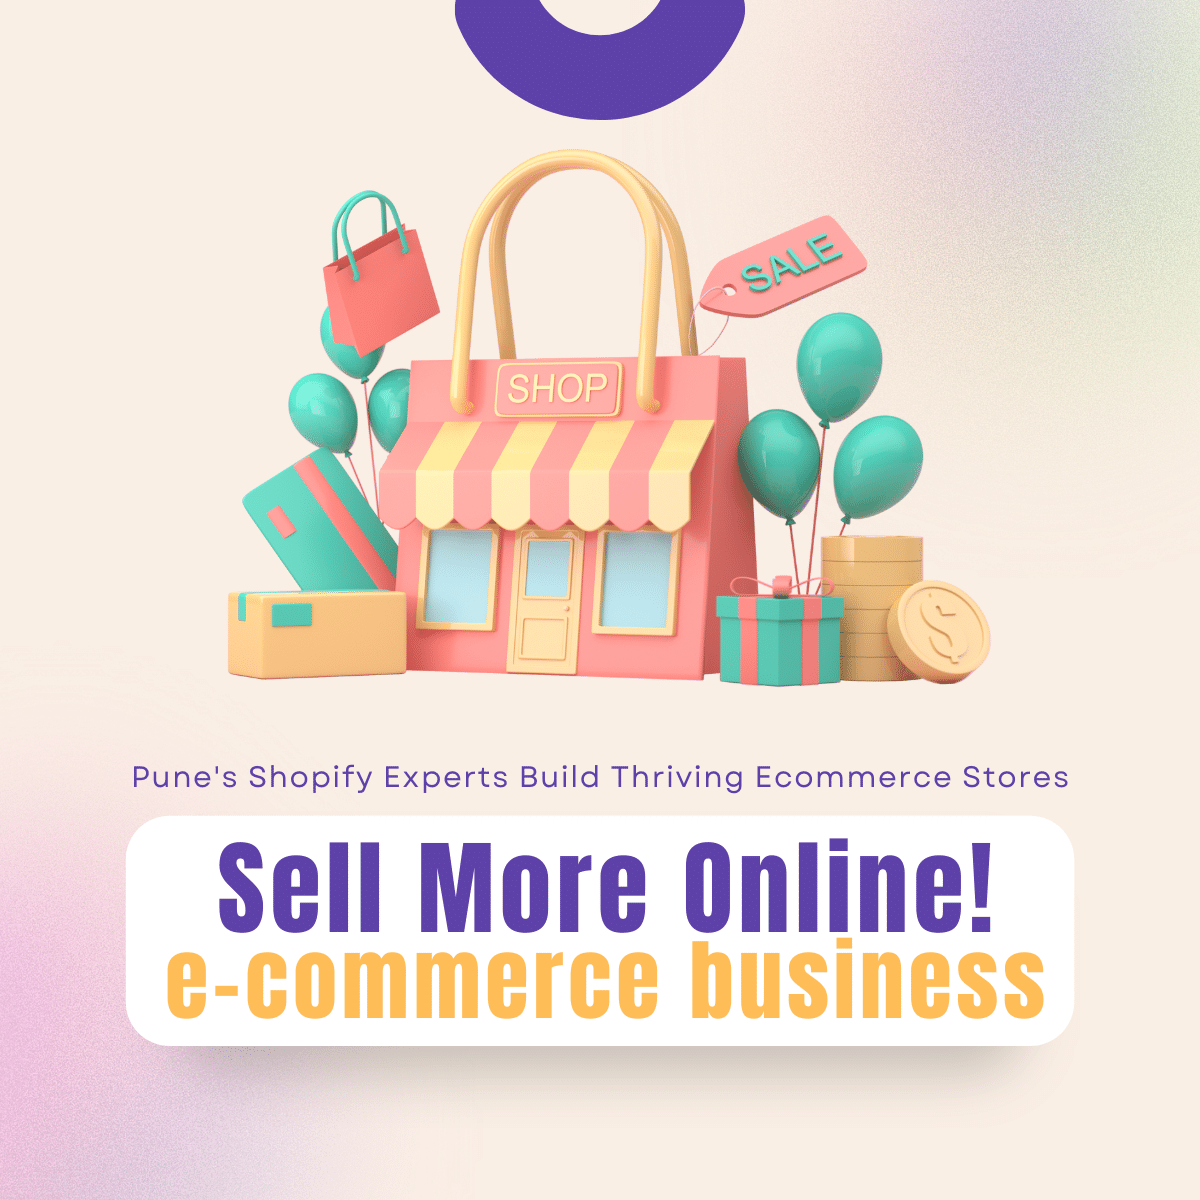 Sell More Online! Pune's Shopify Experts Build Thriving Ecommerce Stores